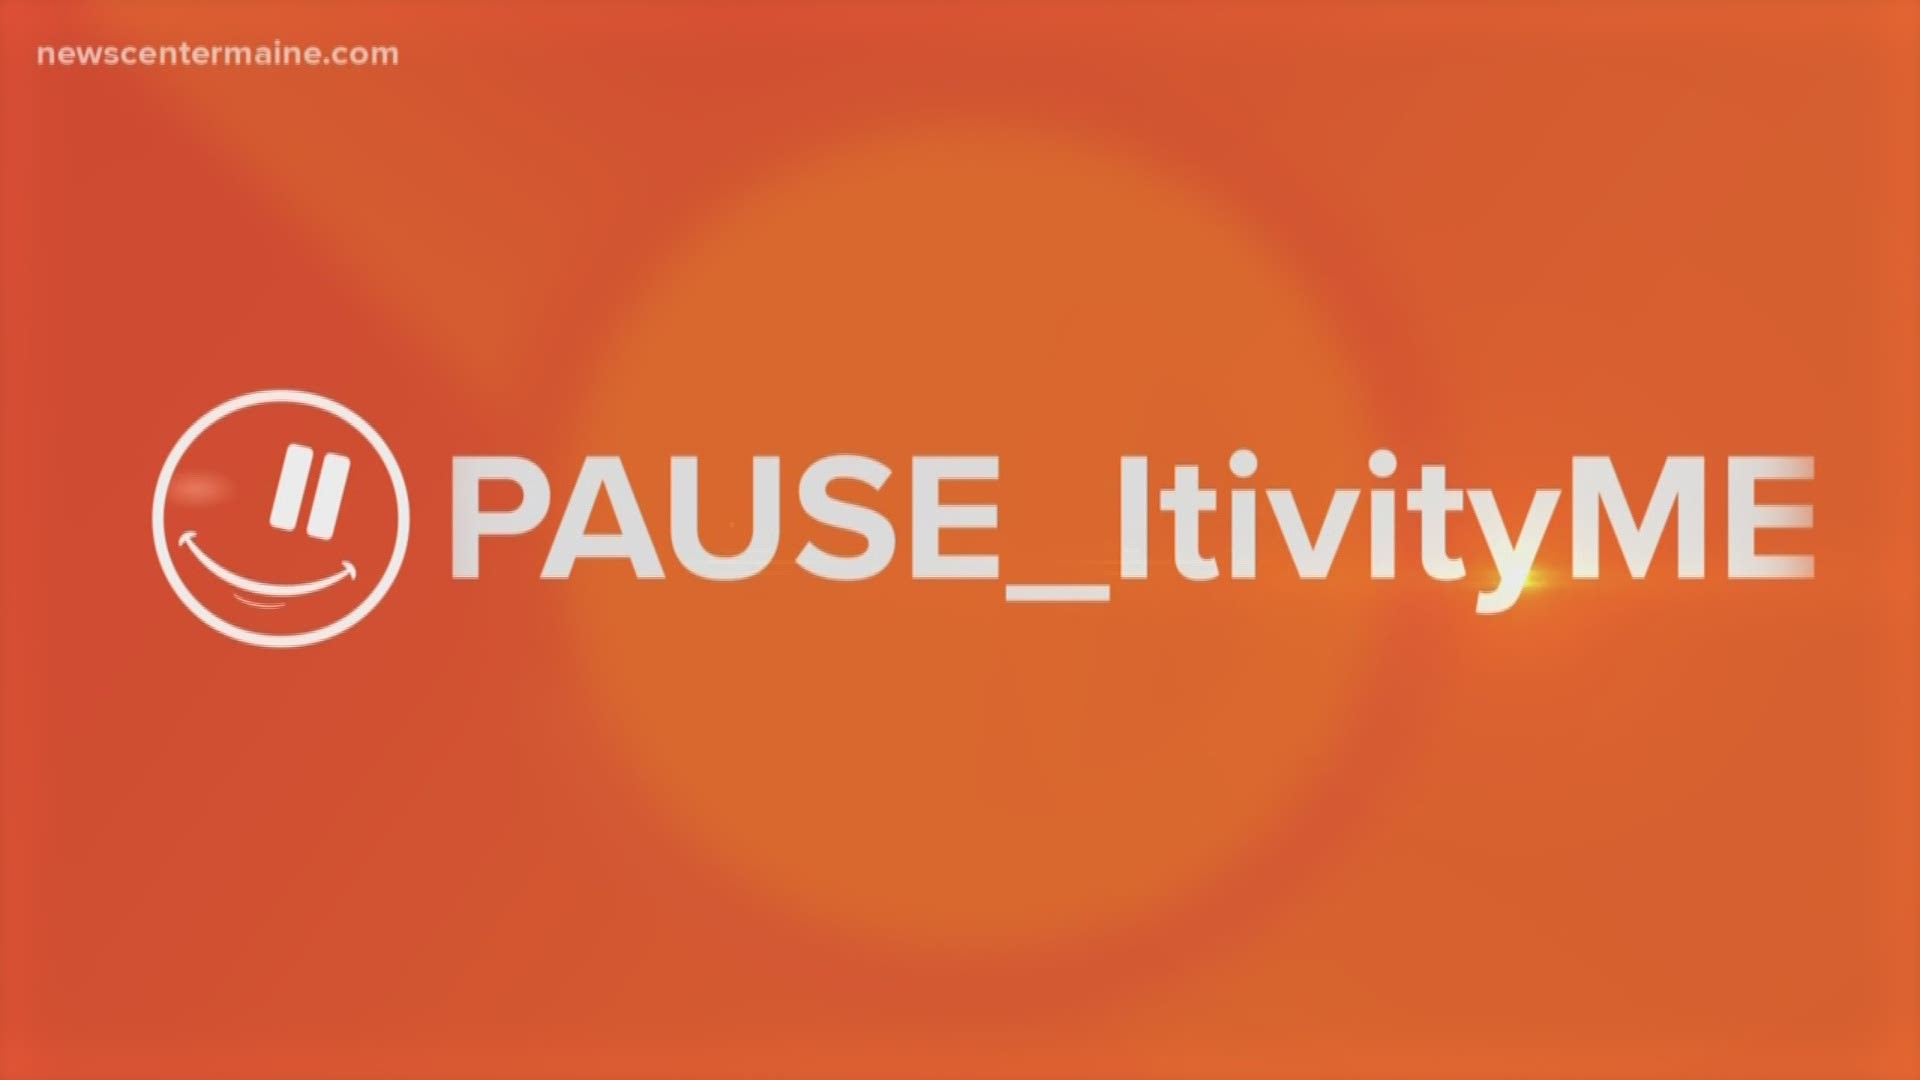 #PAUSE_ItivityME: Election Day